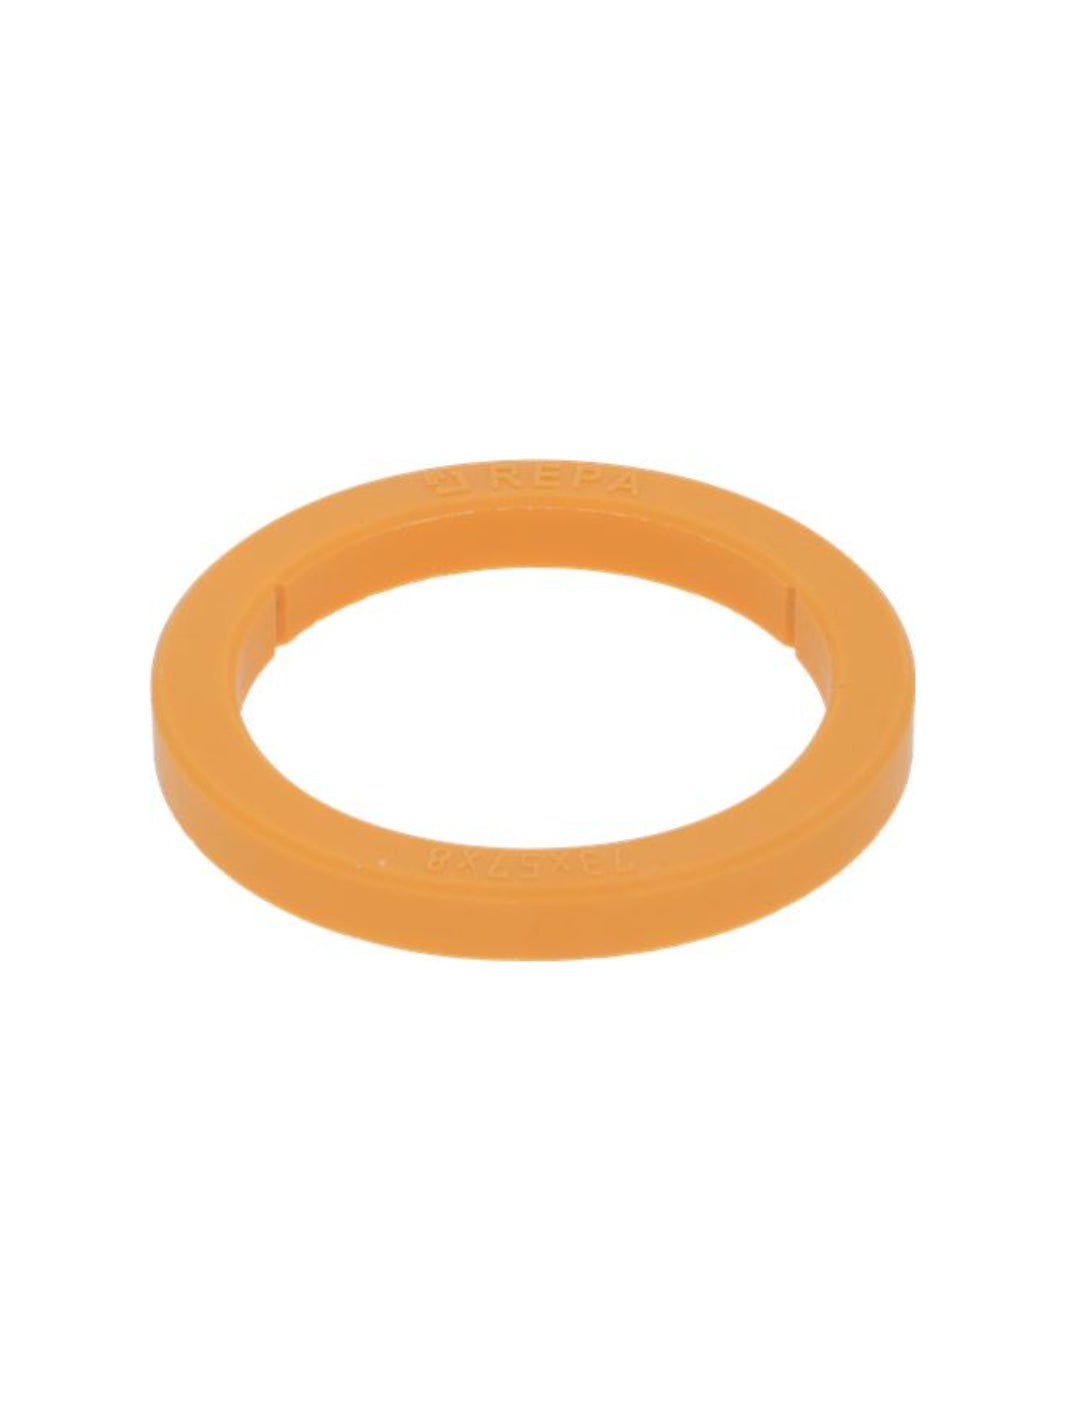 REPA Silicone E61 Group Gasket (8.0mm)